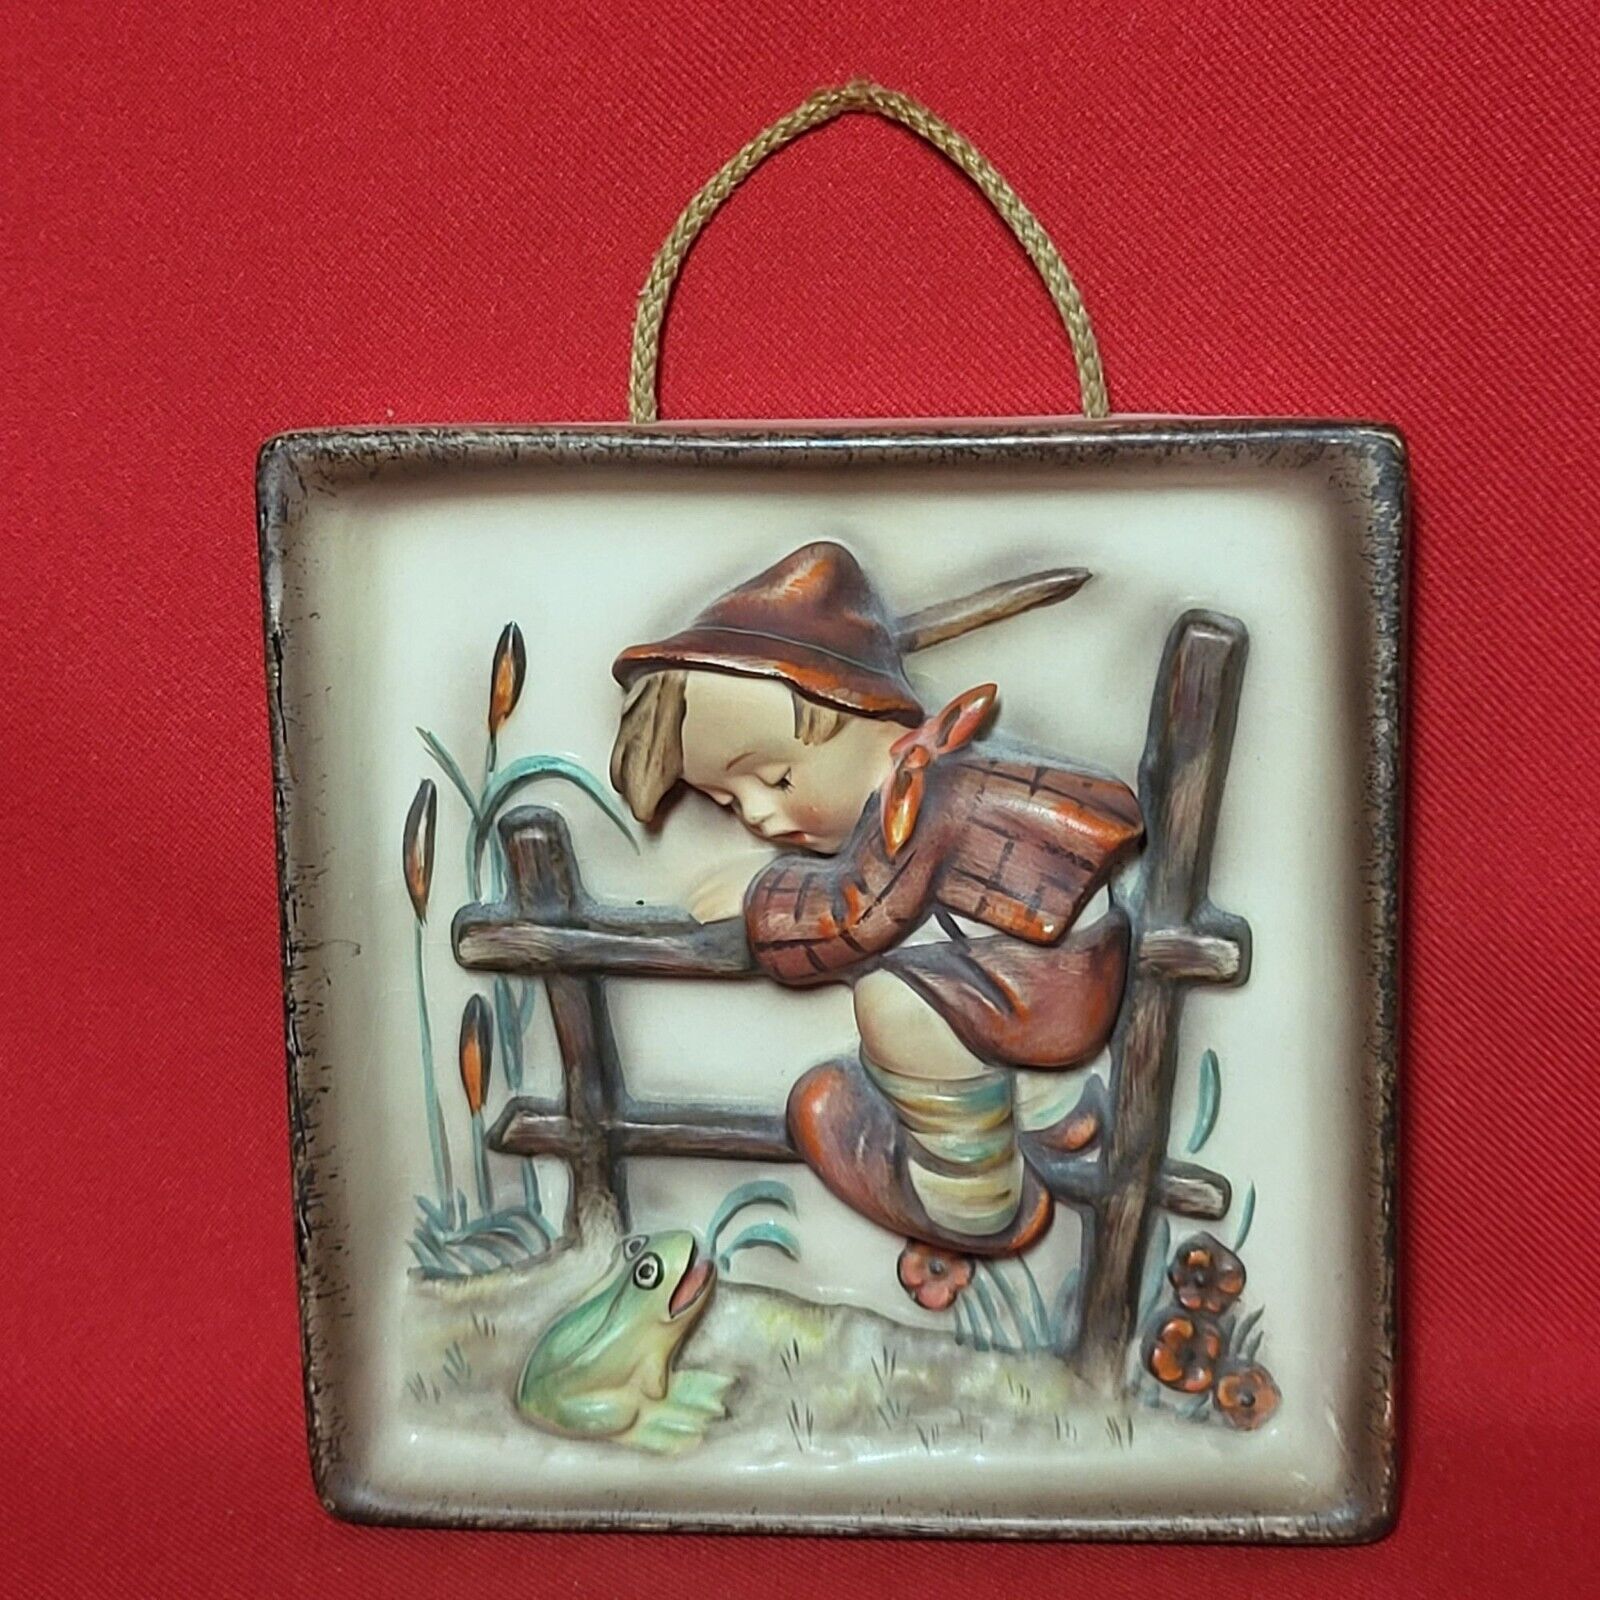 Vintage MJ Hummel Retreat to Safety Wall Plaque Hanging Decor